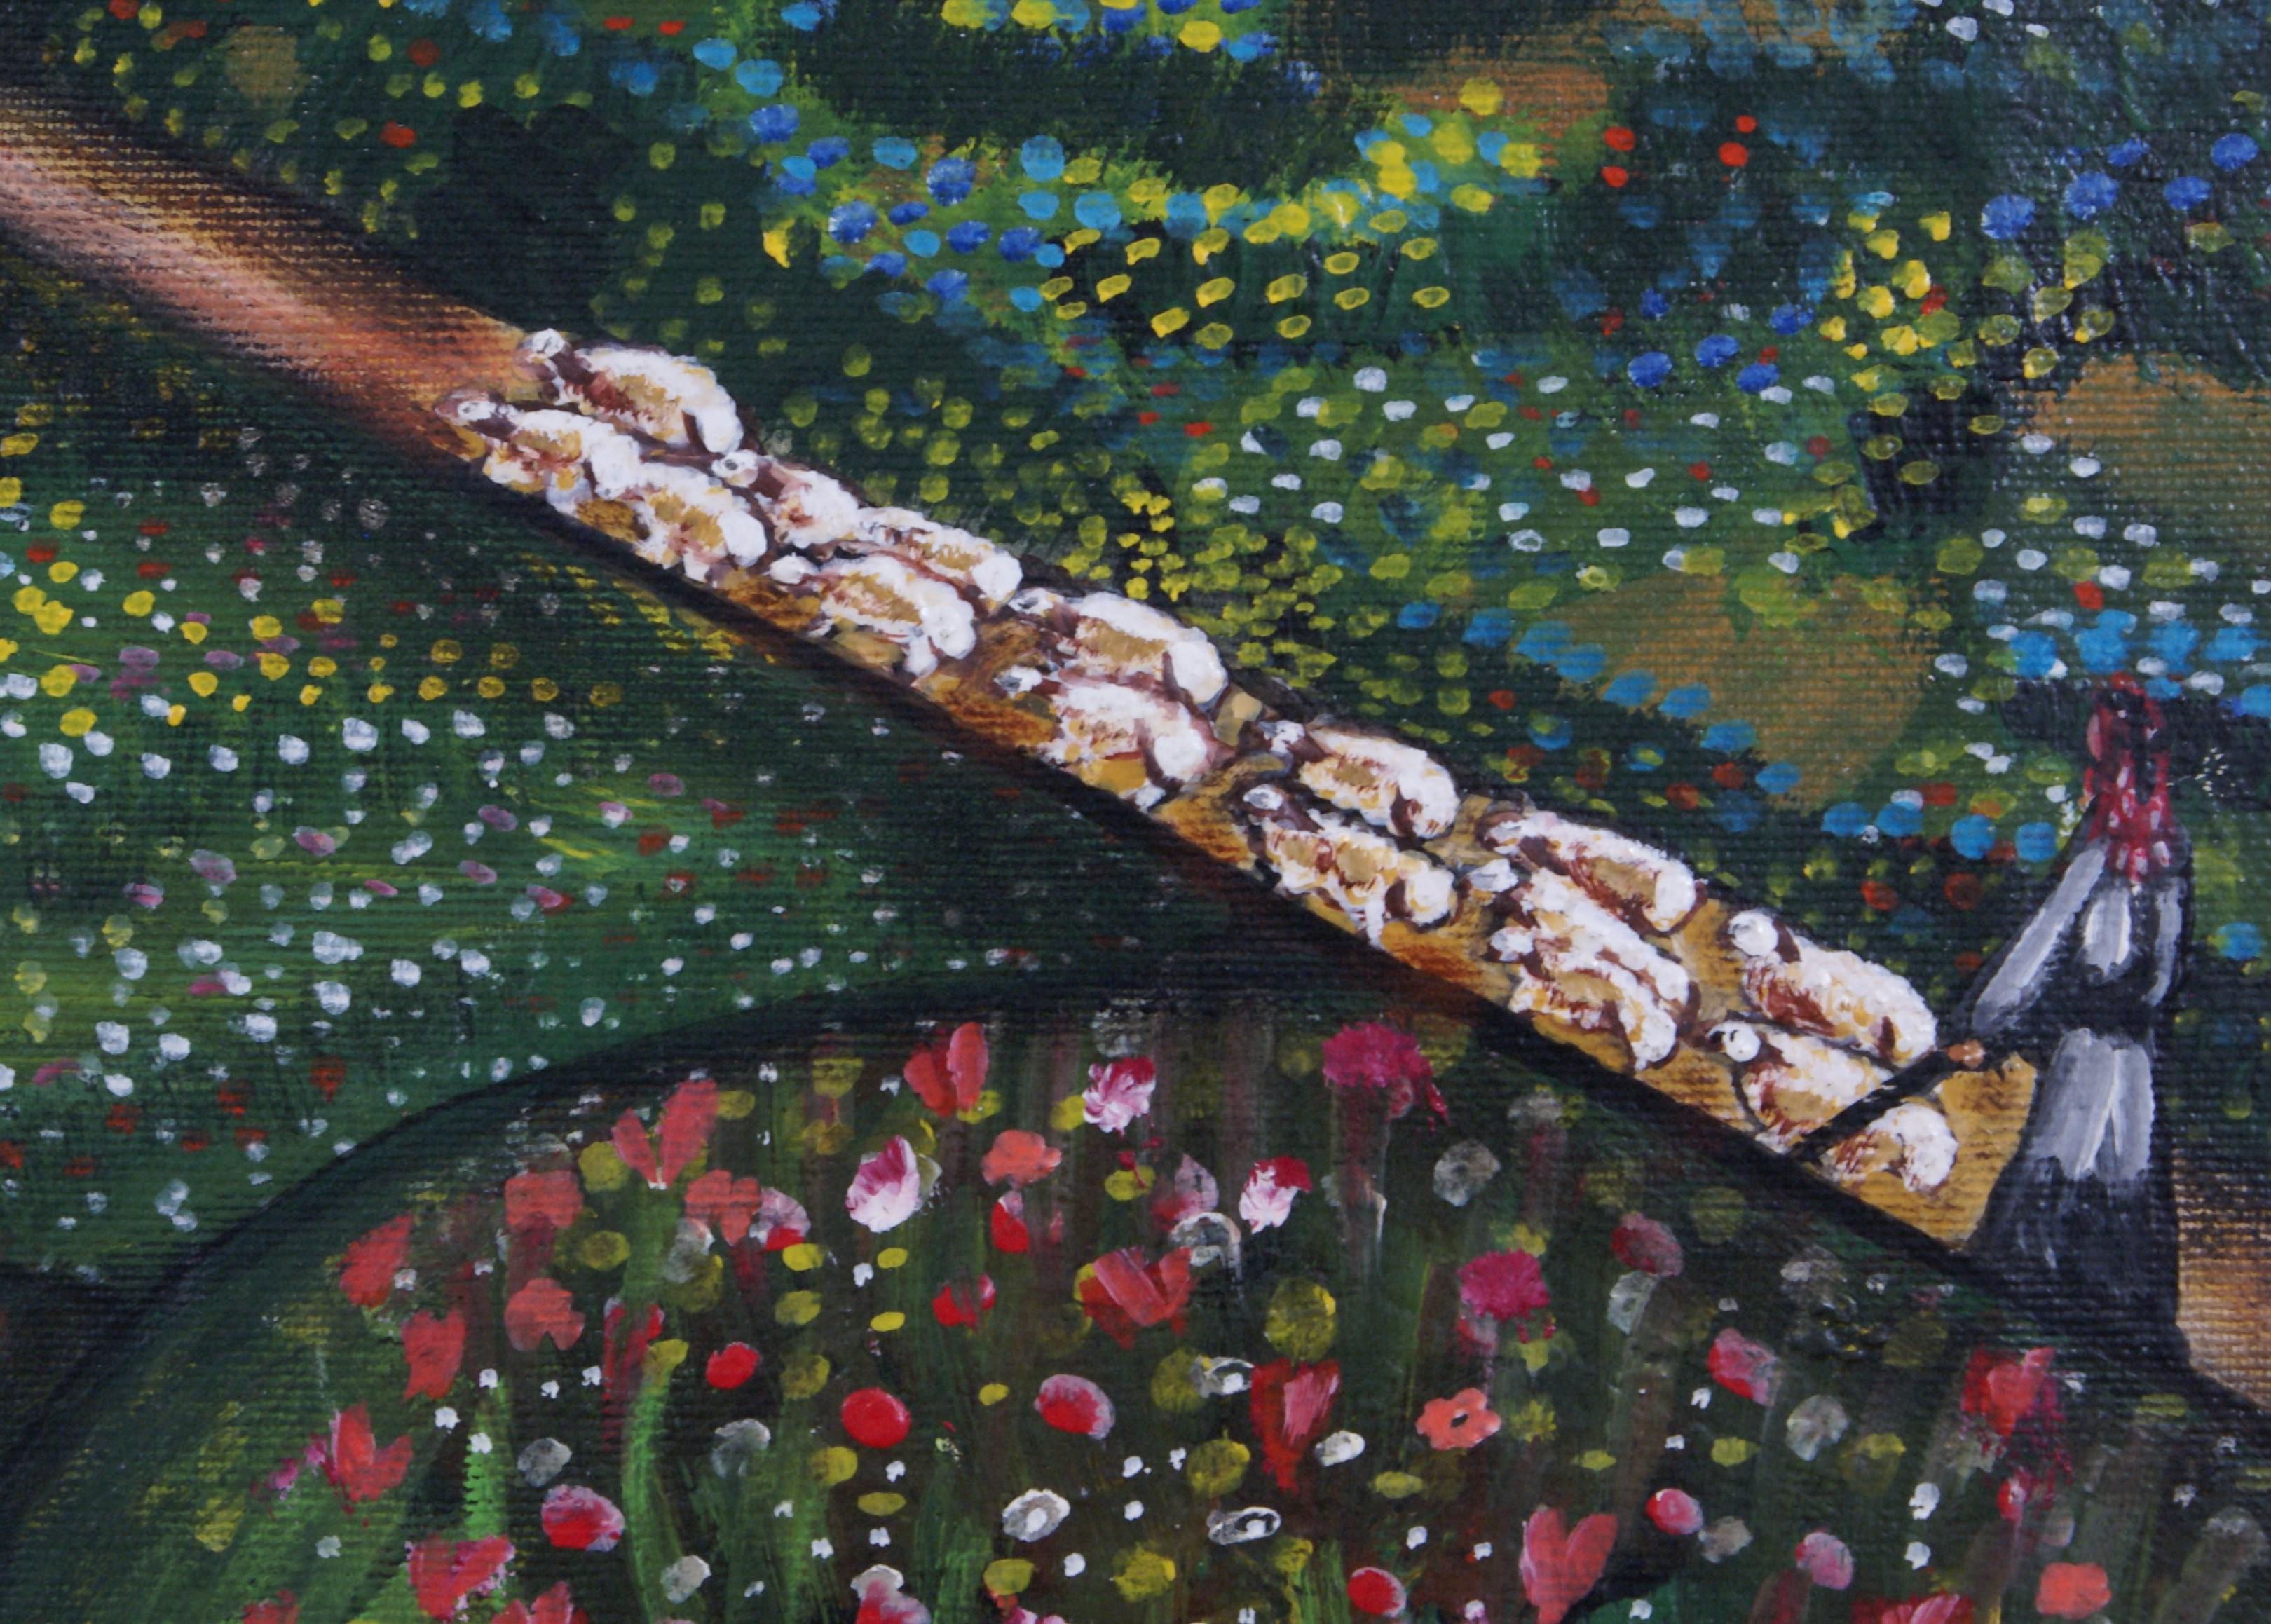 Spring in Baqa'a - Naturalistic Painting by Riham Ghassib